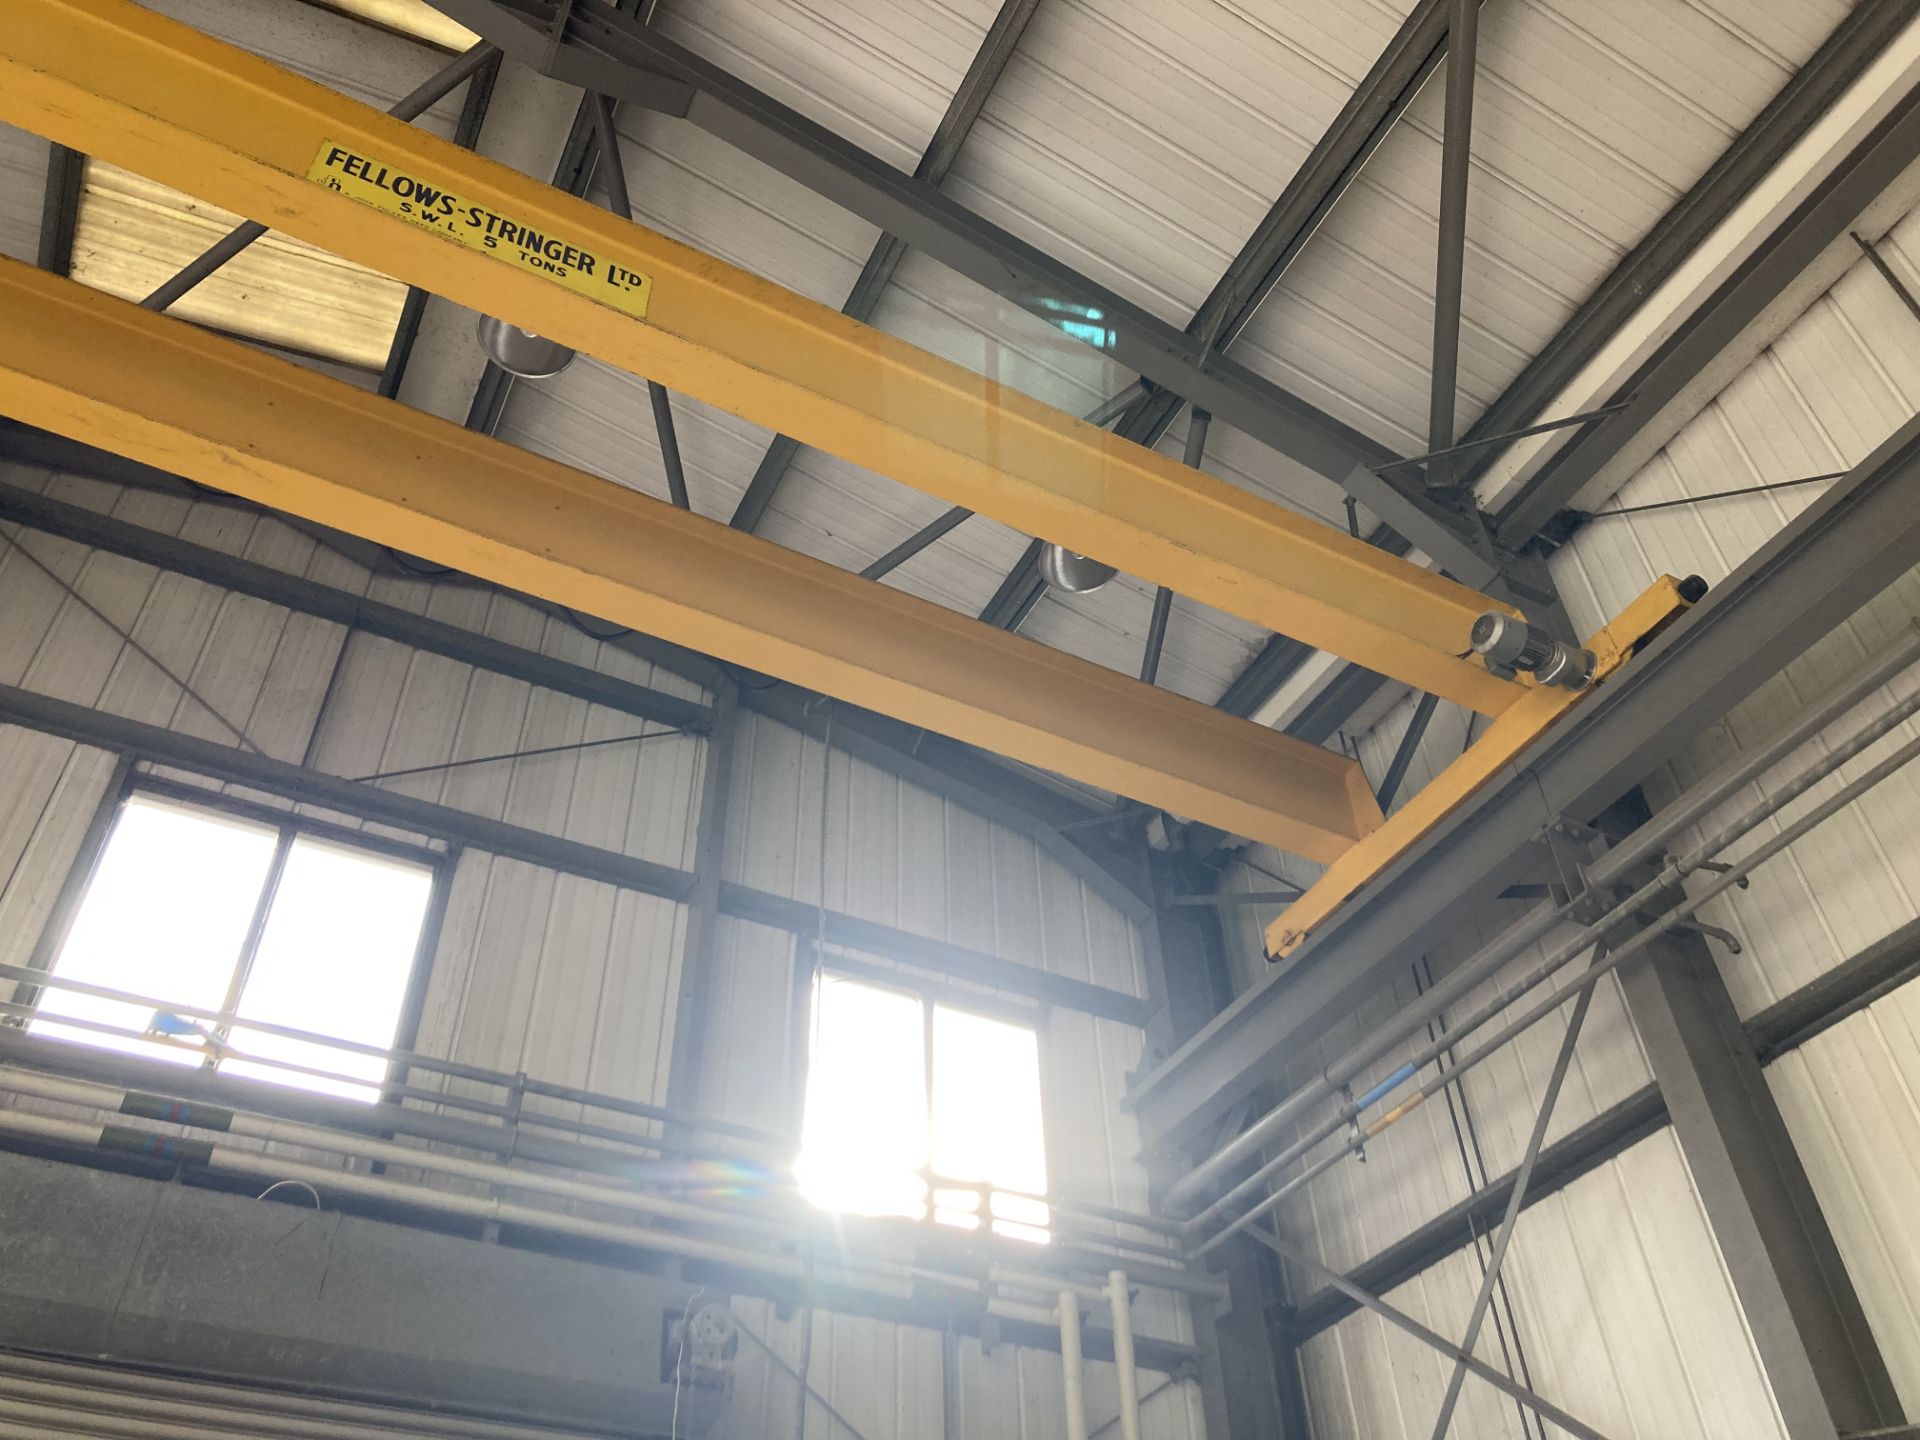 Fellows-Stringer 5 TON TWIN GIRDER OVERHEAD TRAVELLING CRANE, approx. width of crane – 10.73m x - Image 2 of 11